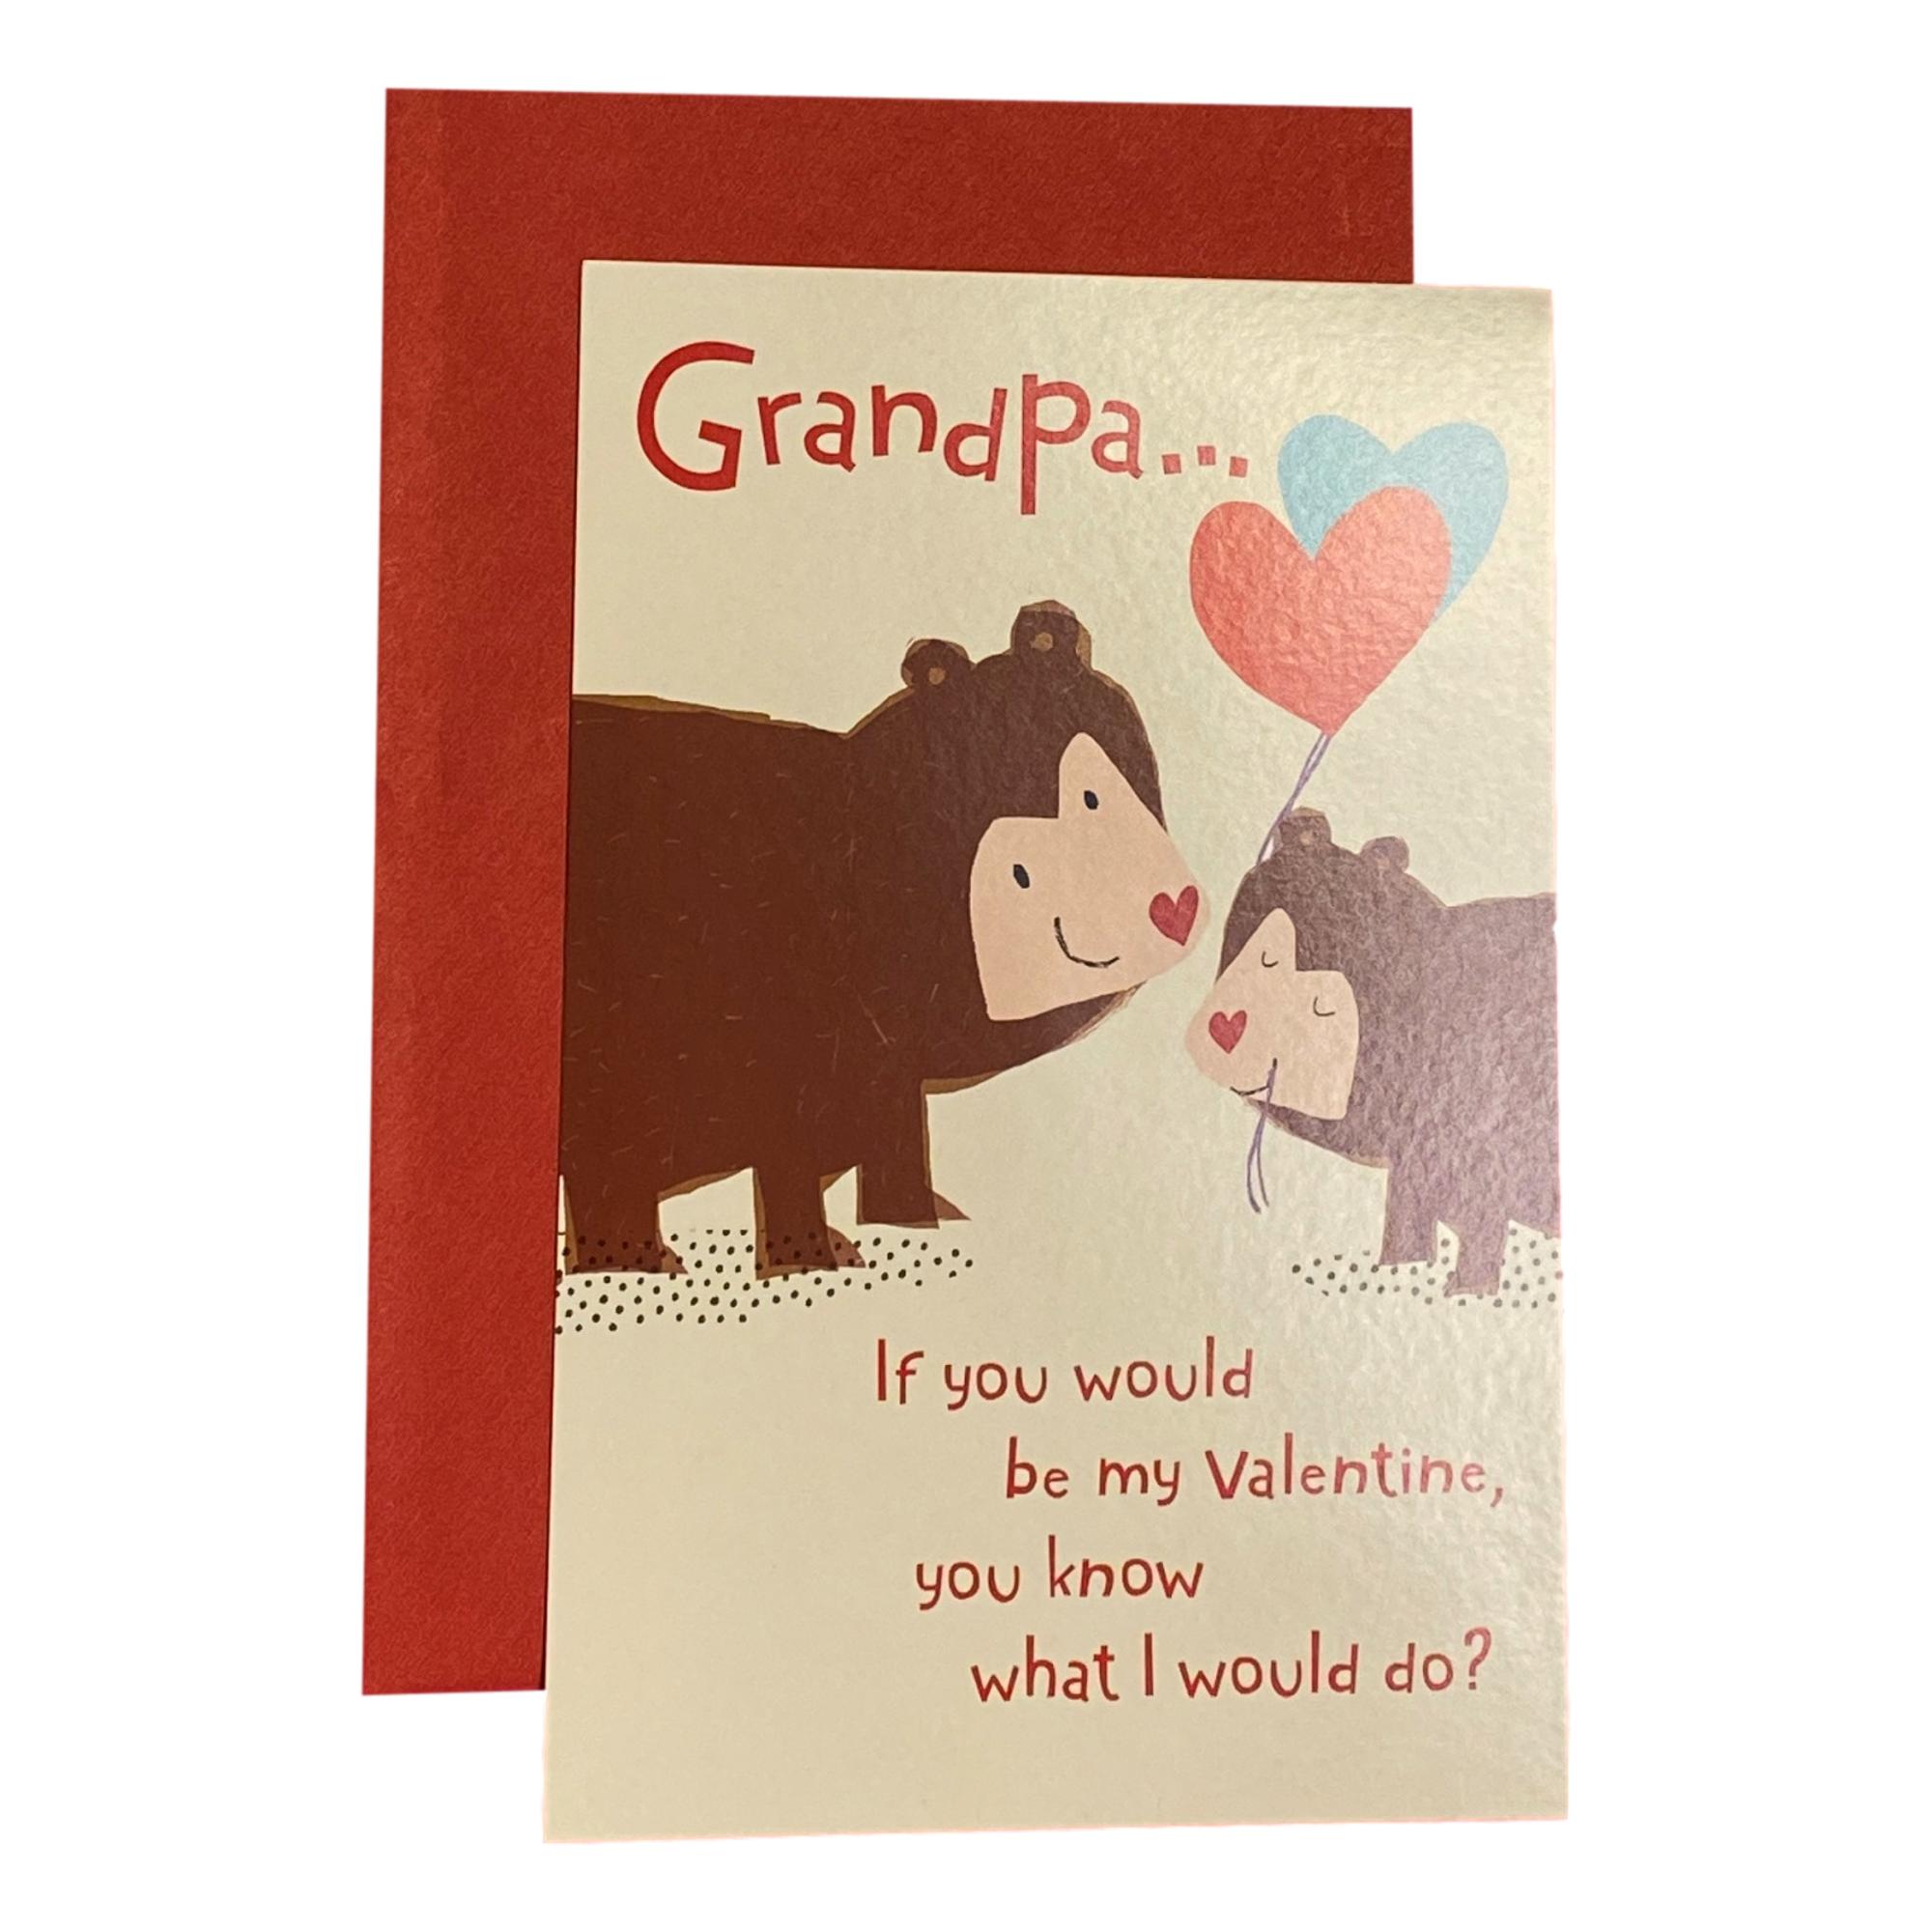 Download Valentines Day Greeting Card for Grandma - Grandpa... If ...